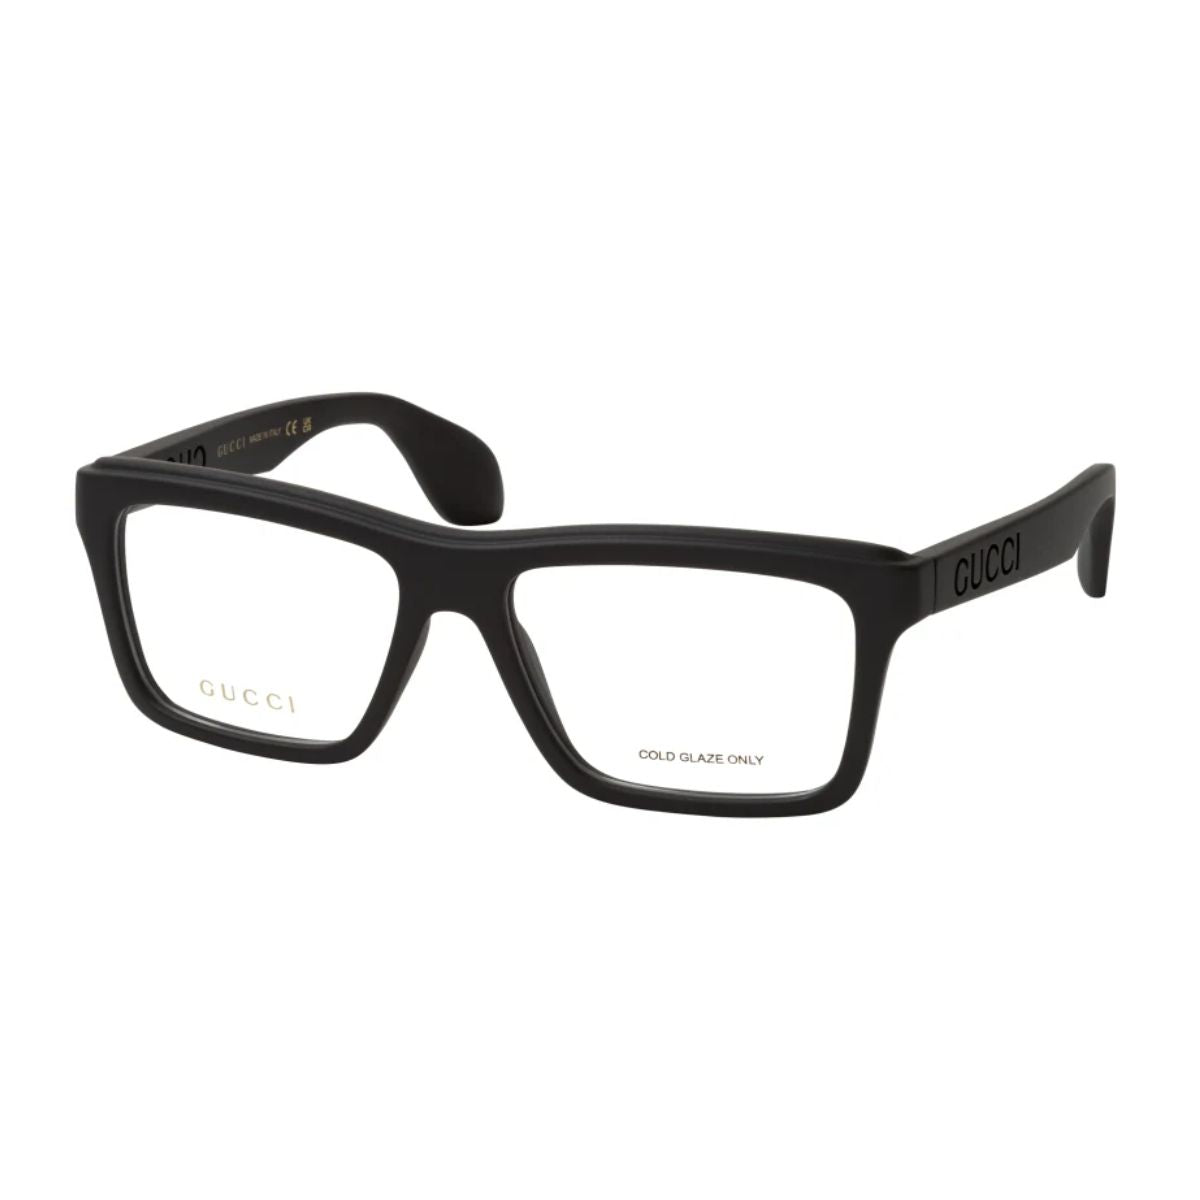 "Gucci 1573O 001 Frames - Enhance Your Look with Optorium's Collection"